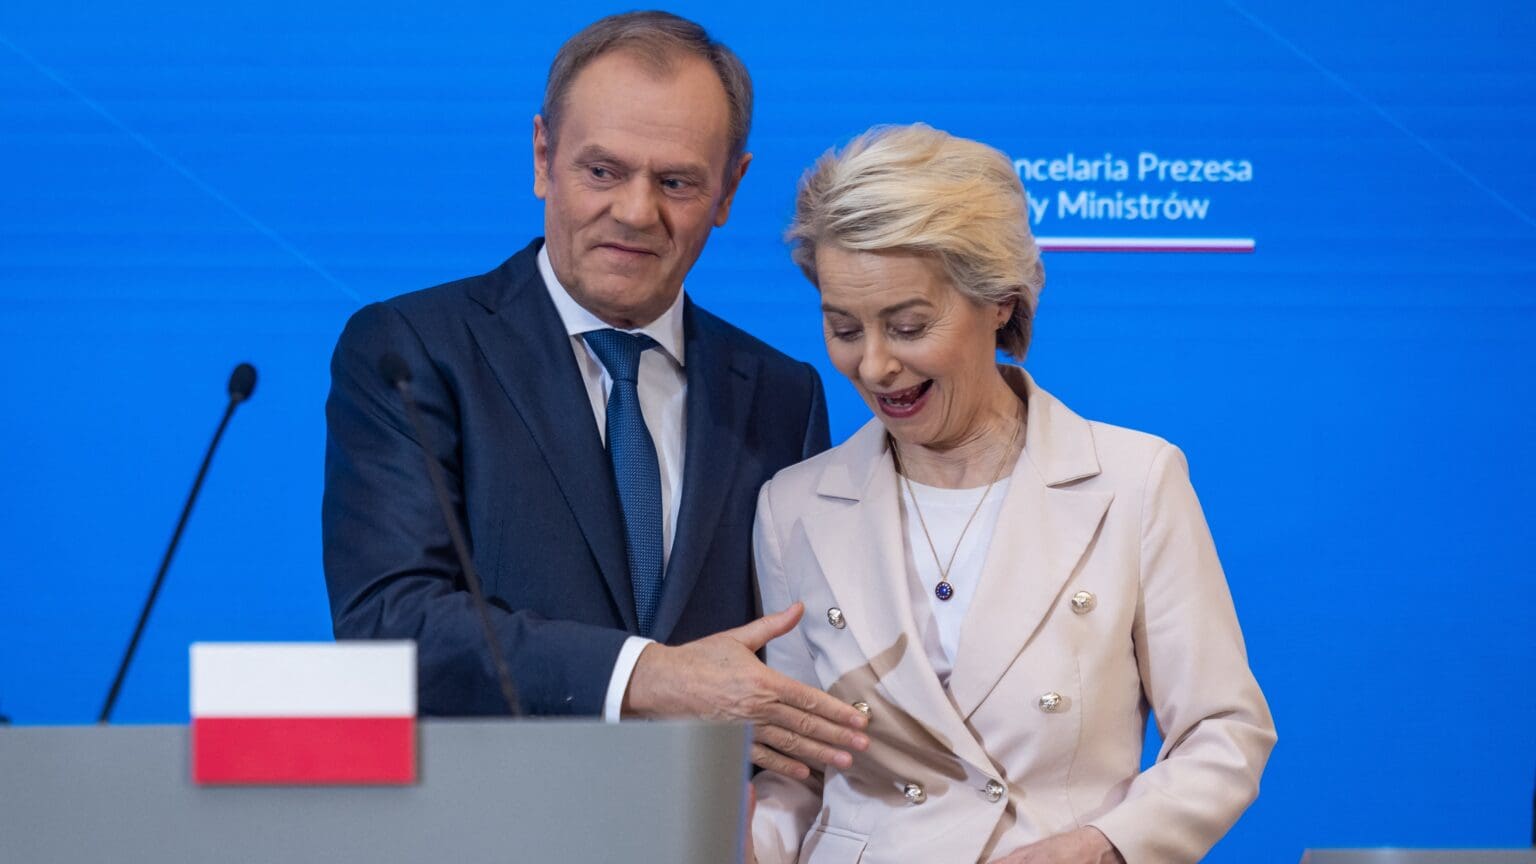 Von der Leyen Will Not Be the ‘Right-Wing’ Candidate in the EP